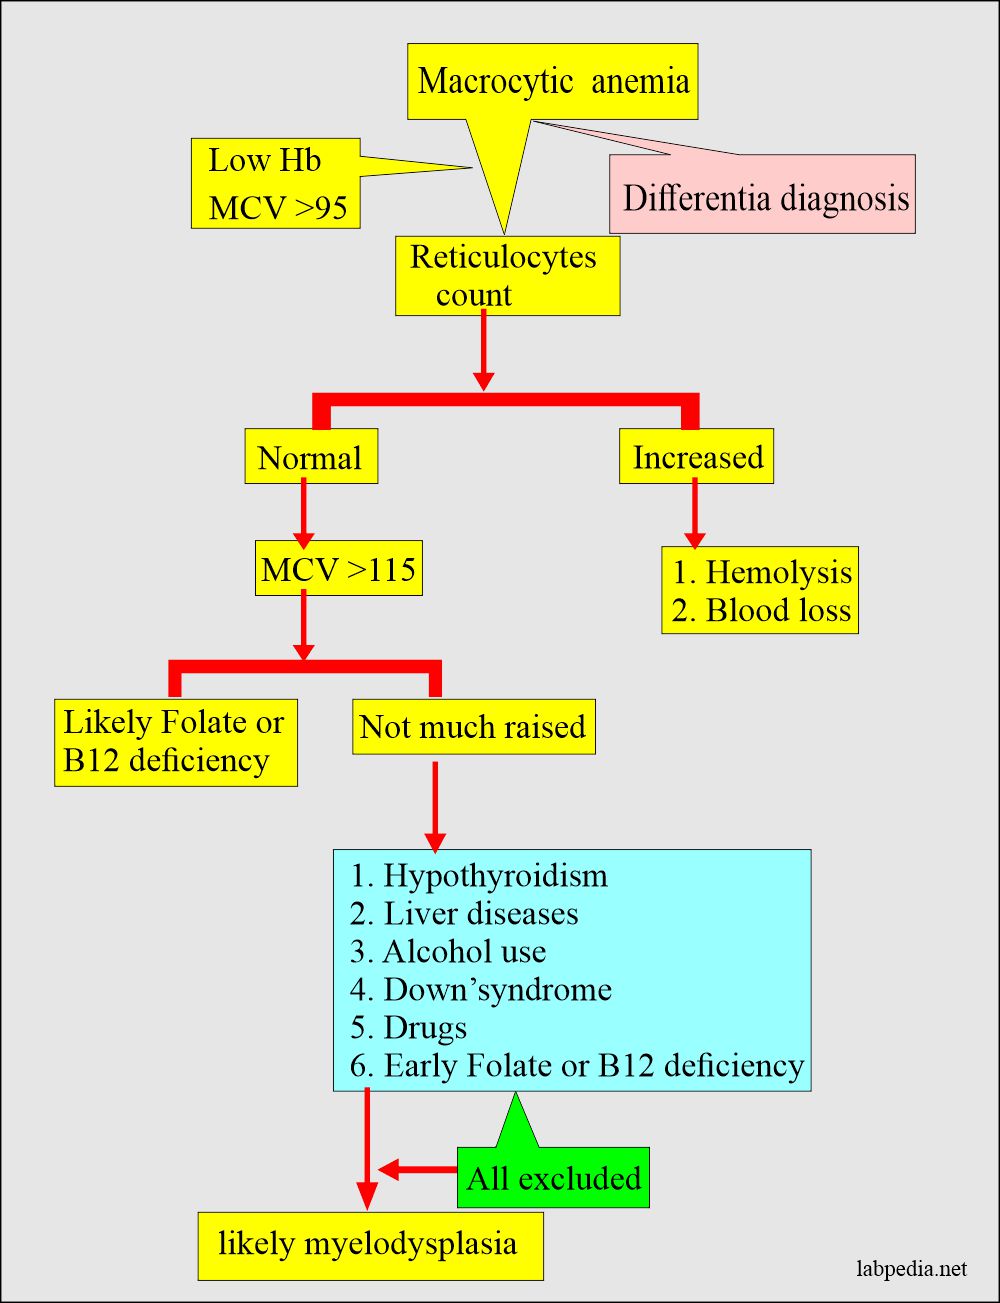 Differential diagnosis of macrocytic anemia